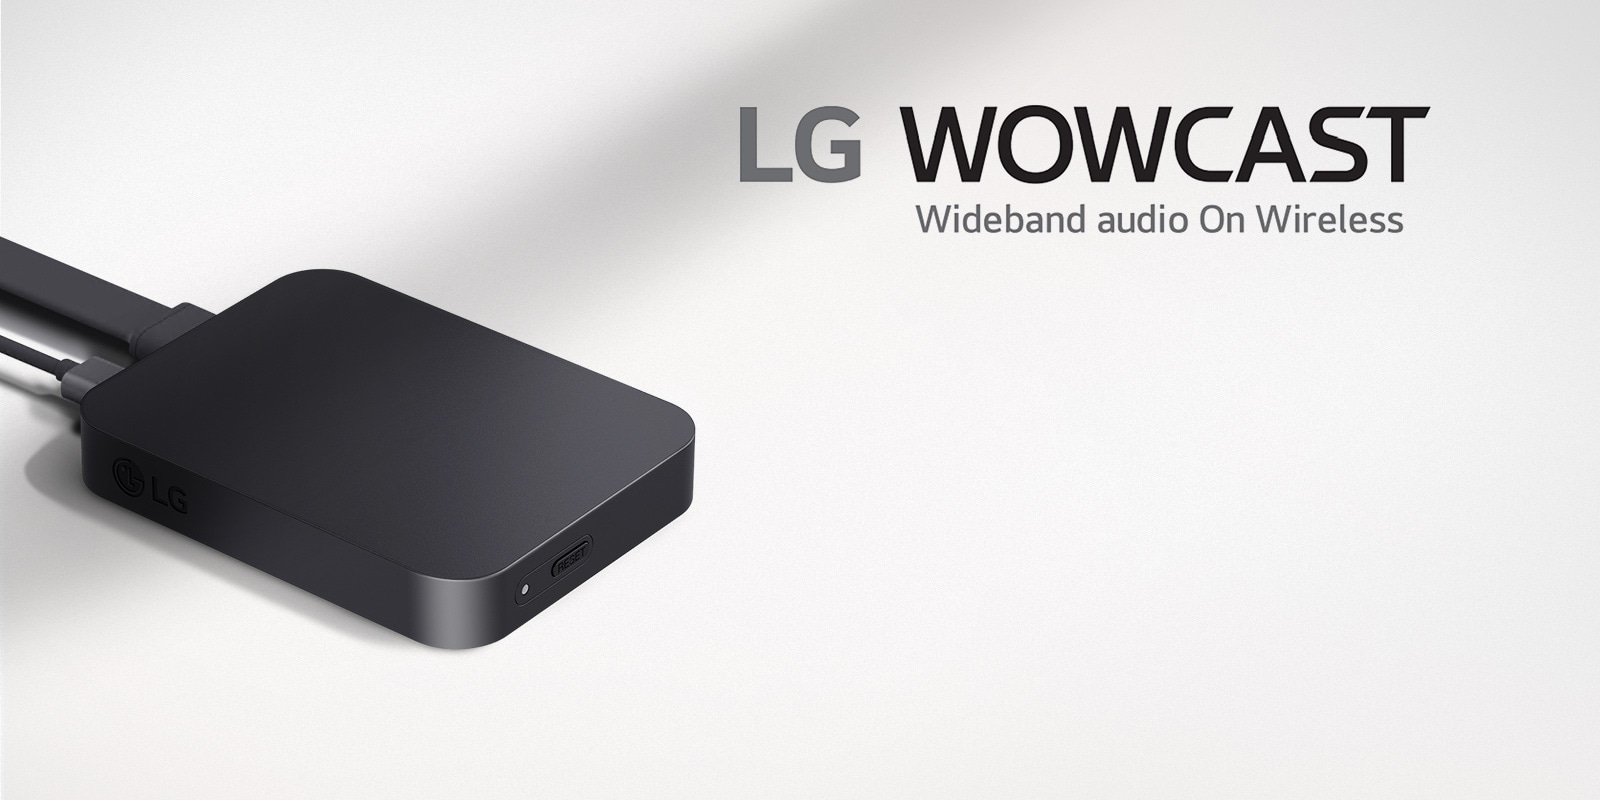 A right-sided diagonal view of WOWCAST from a slight top. WOWCAST is placed on a light gray background. A product logo LG WOWCAST is placed above copy.